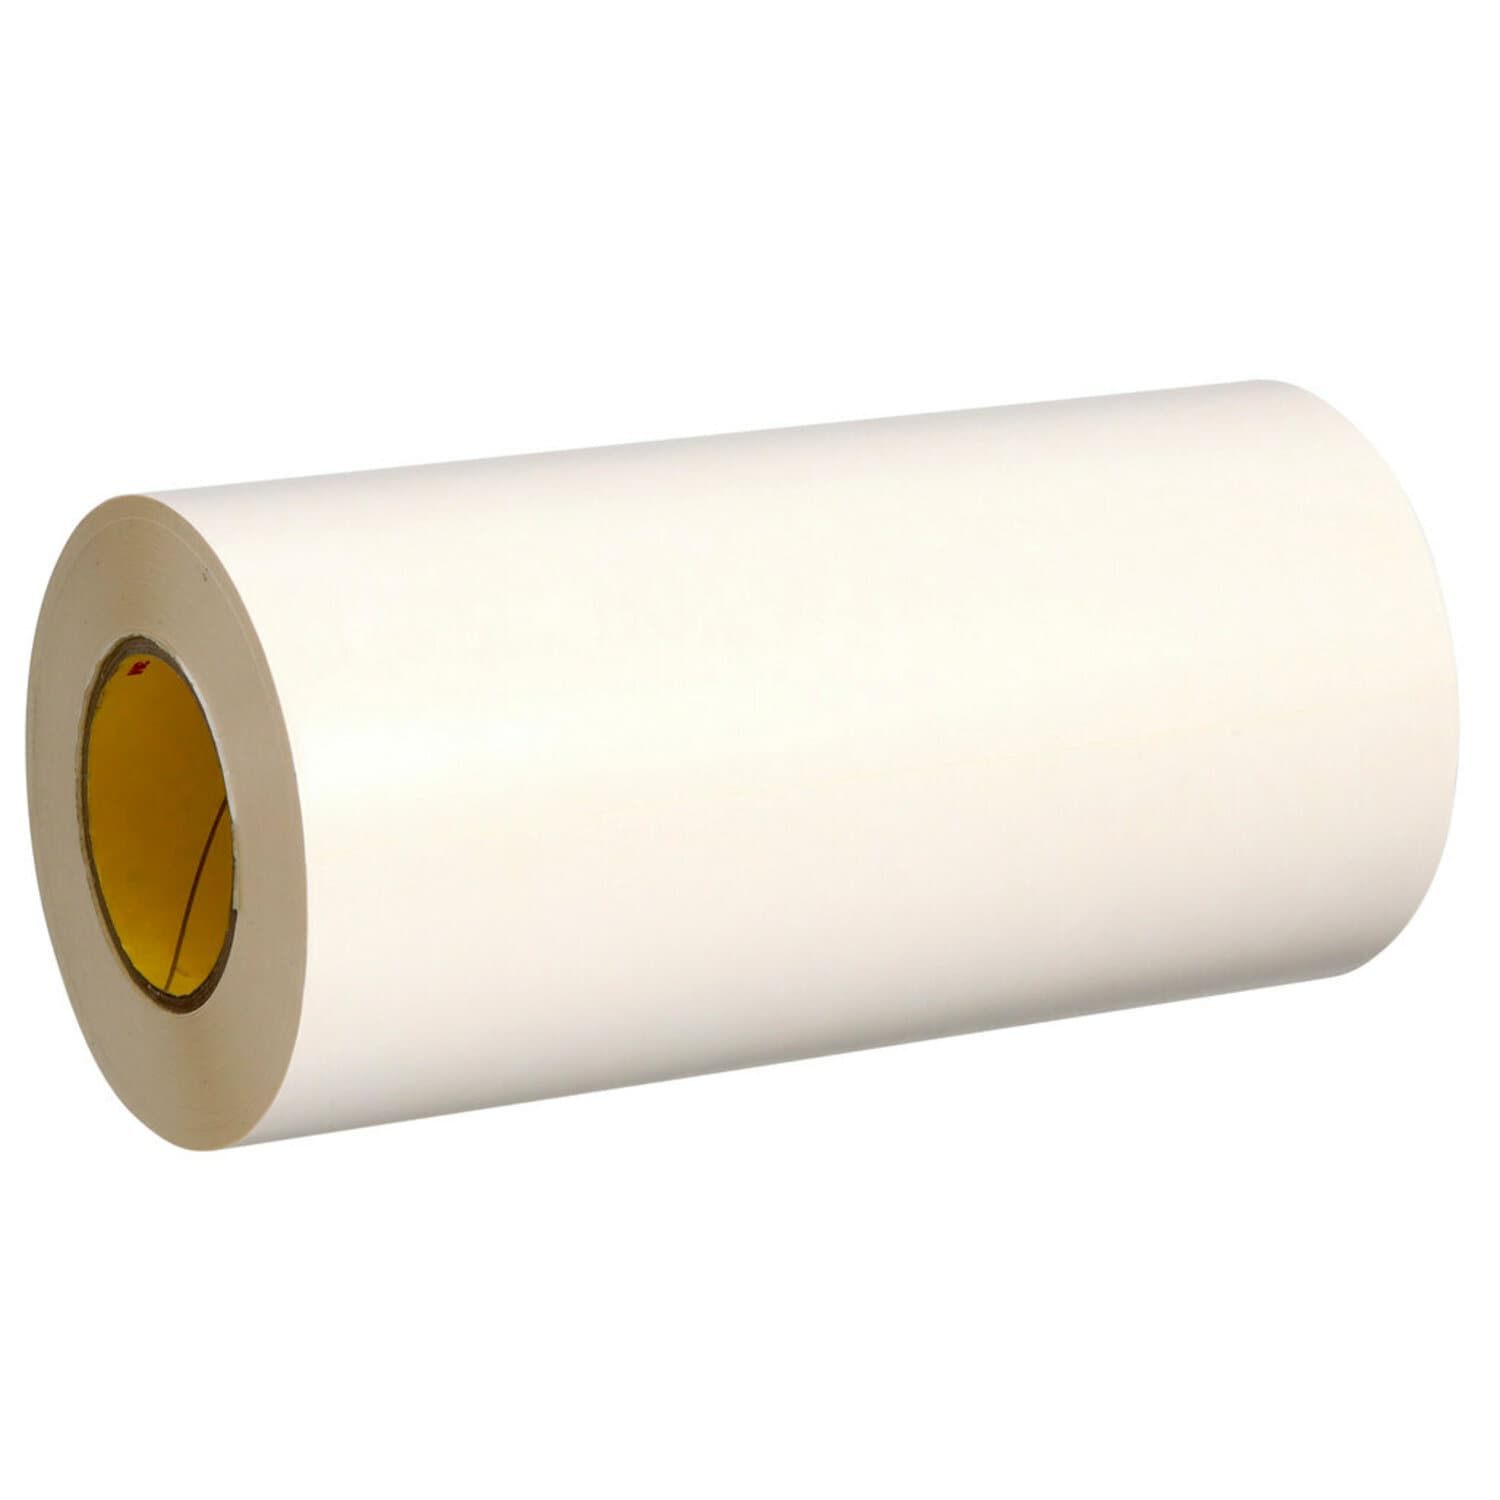 7100205352 - 3M Double Coated Polyester Tape 442KW, 2 in x 36 yd, NL